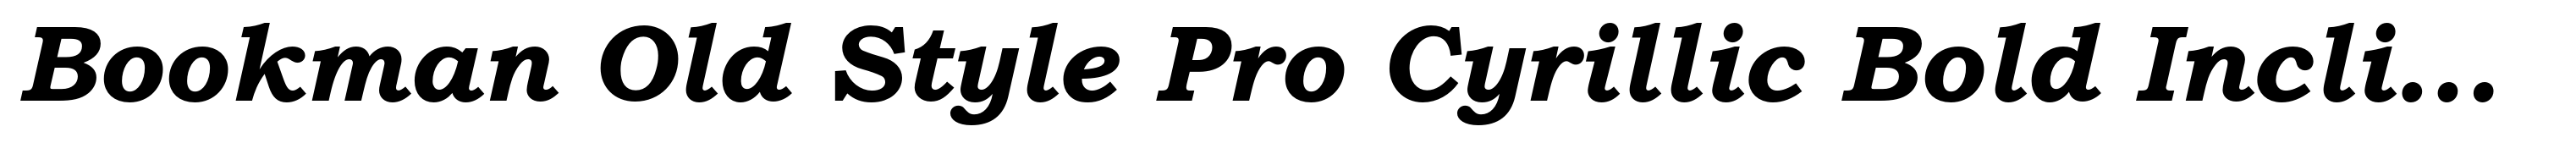 Bookman Old Style Pro Cyrillic Bold Inclined